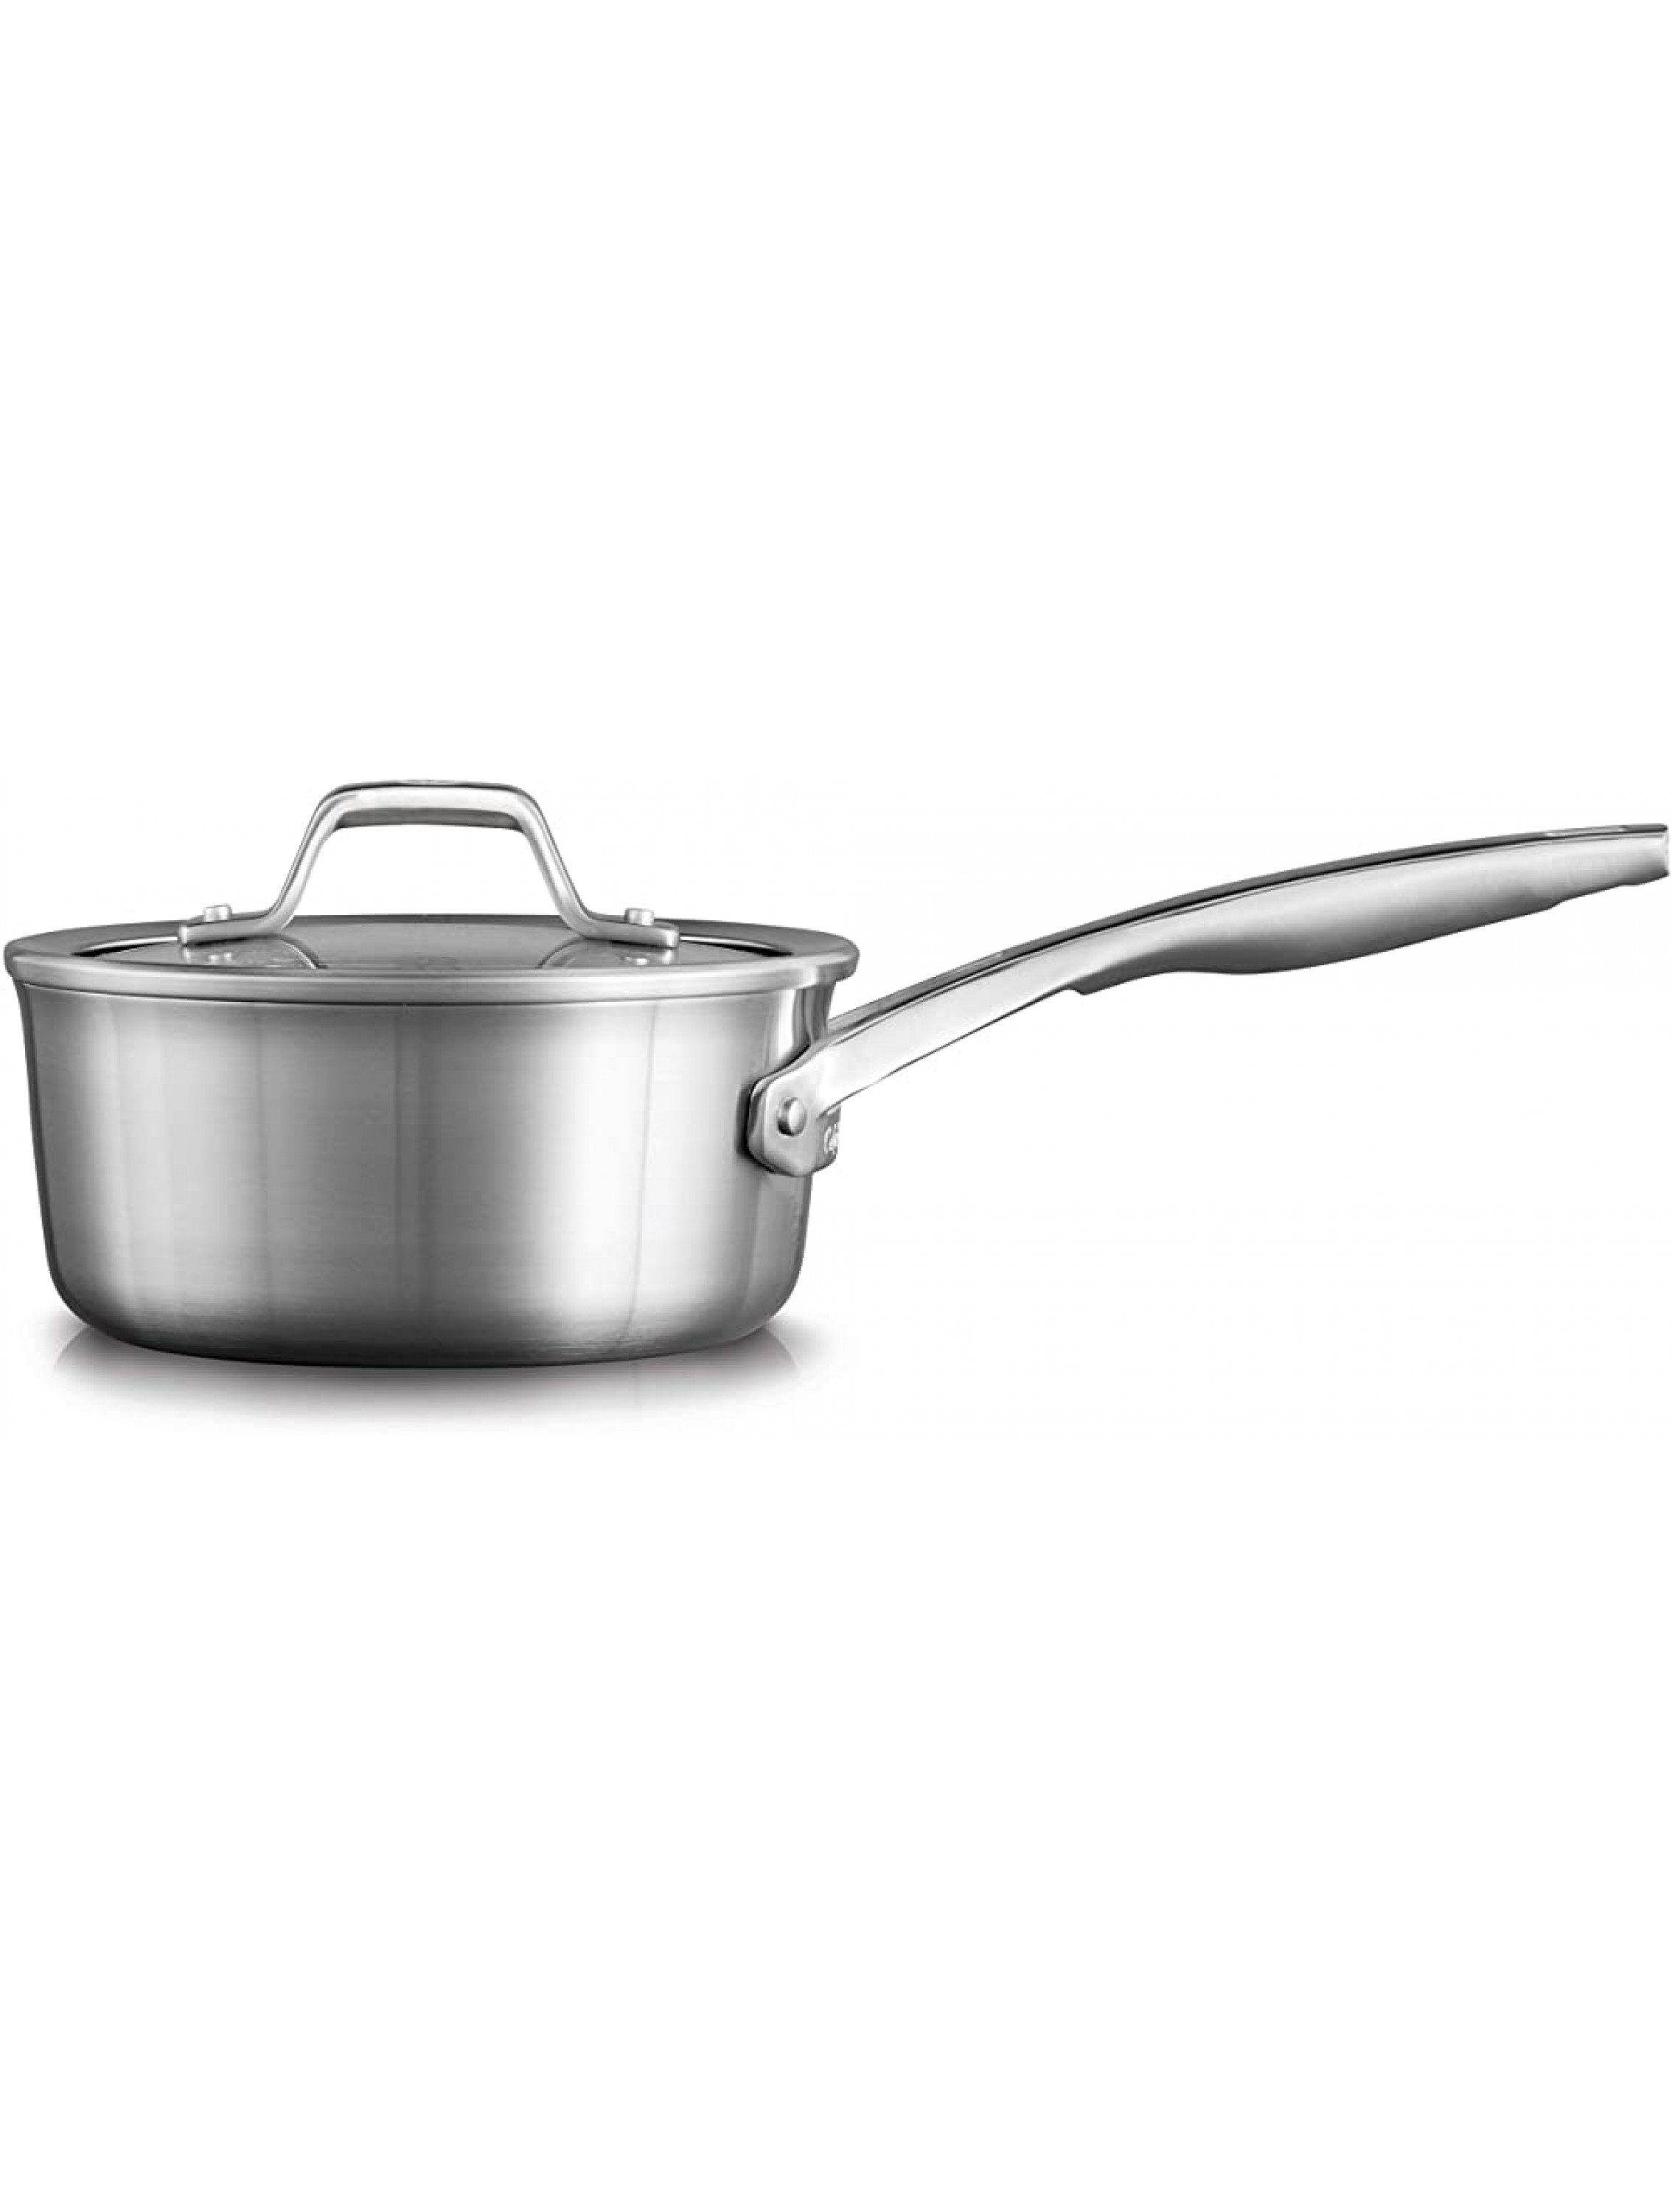 Calphalon Premier Stainless Steel Cookware 1.5-Quart Sauce Pan with Cover - B9HGJVKCY